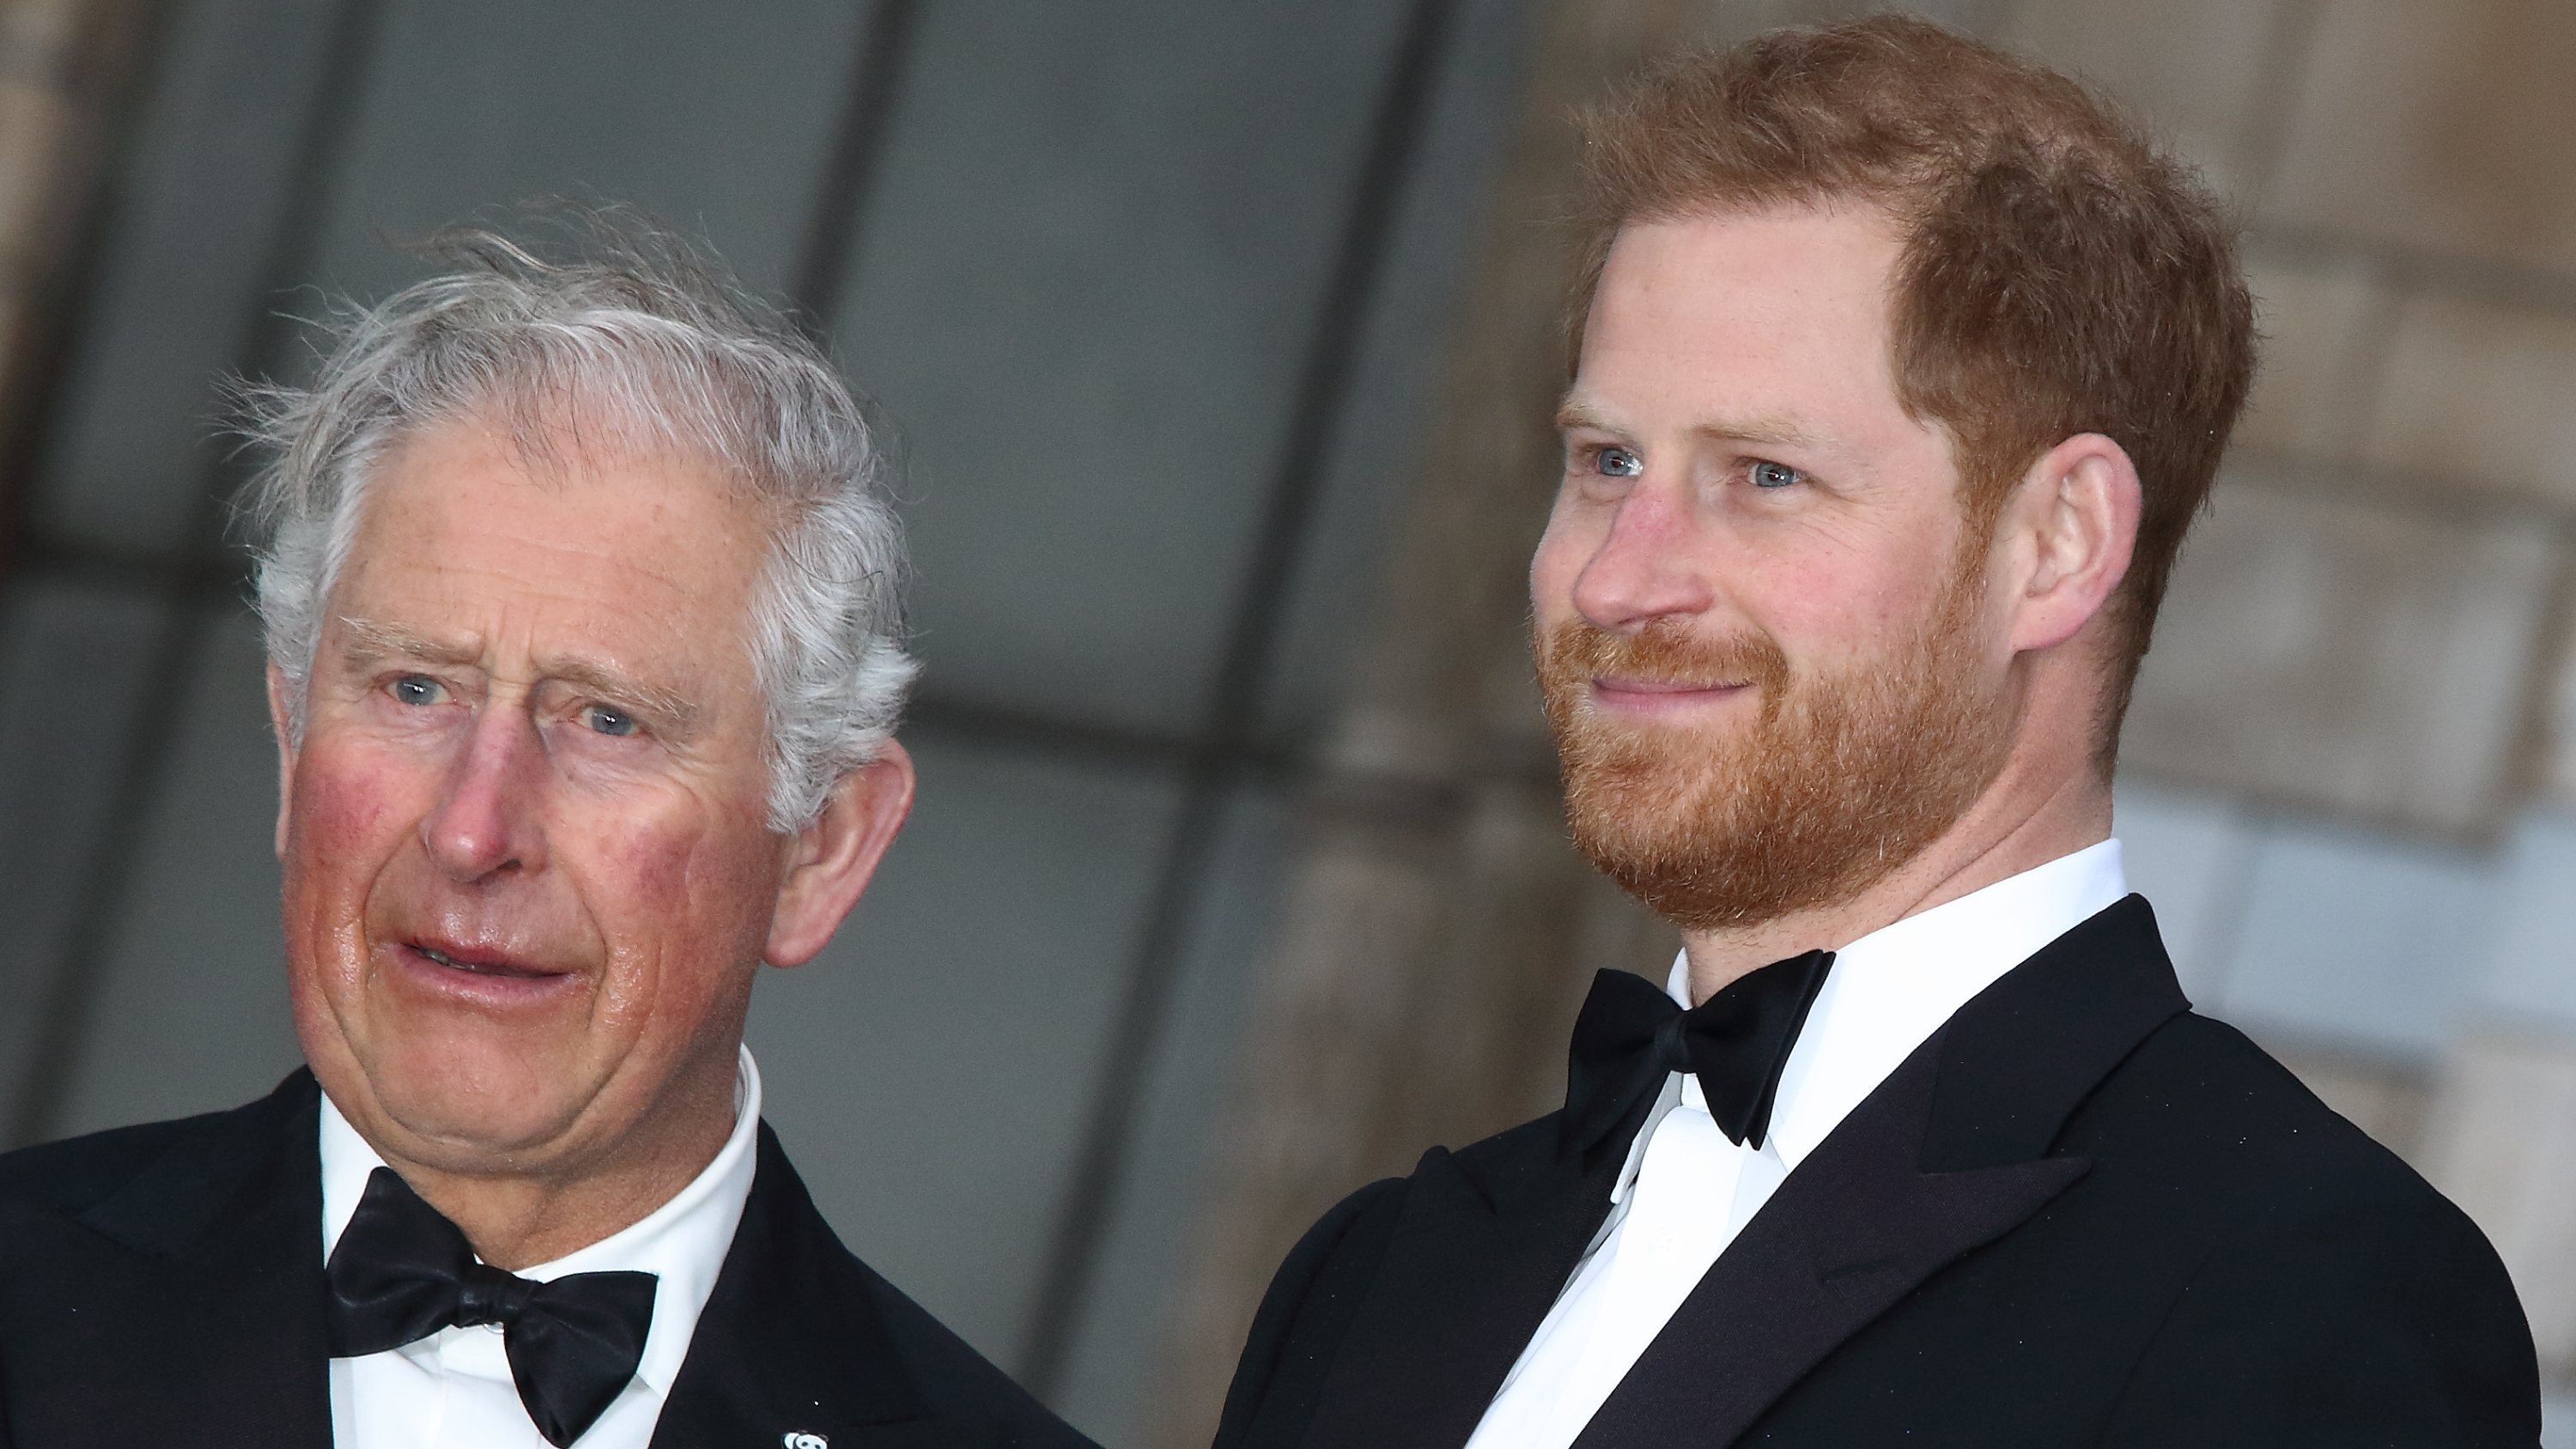 HRH Prince Harry with HRH Prince Charles at the World